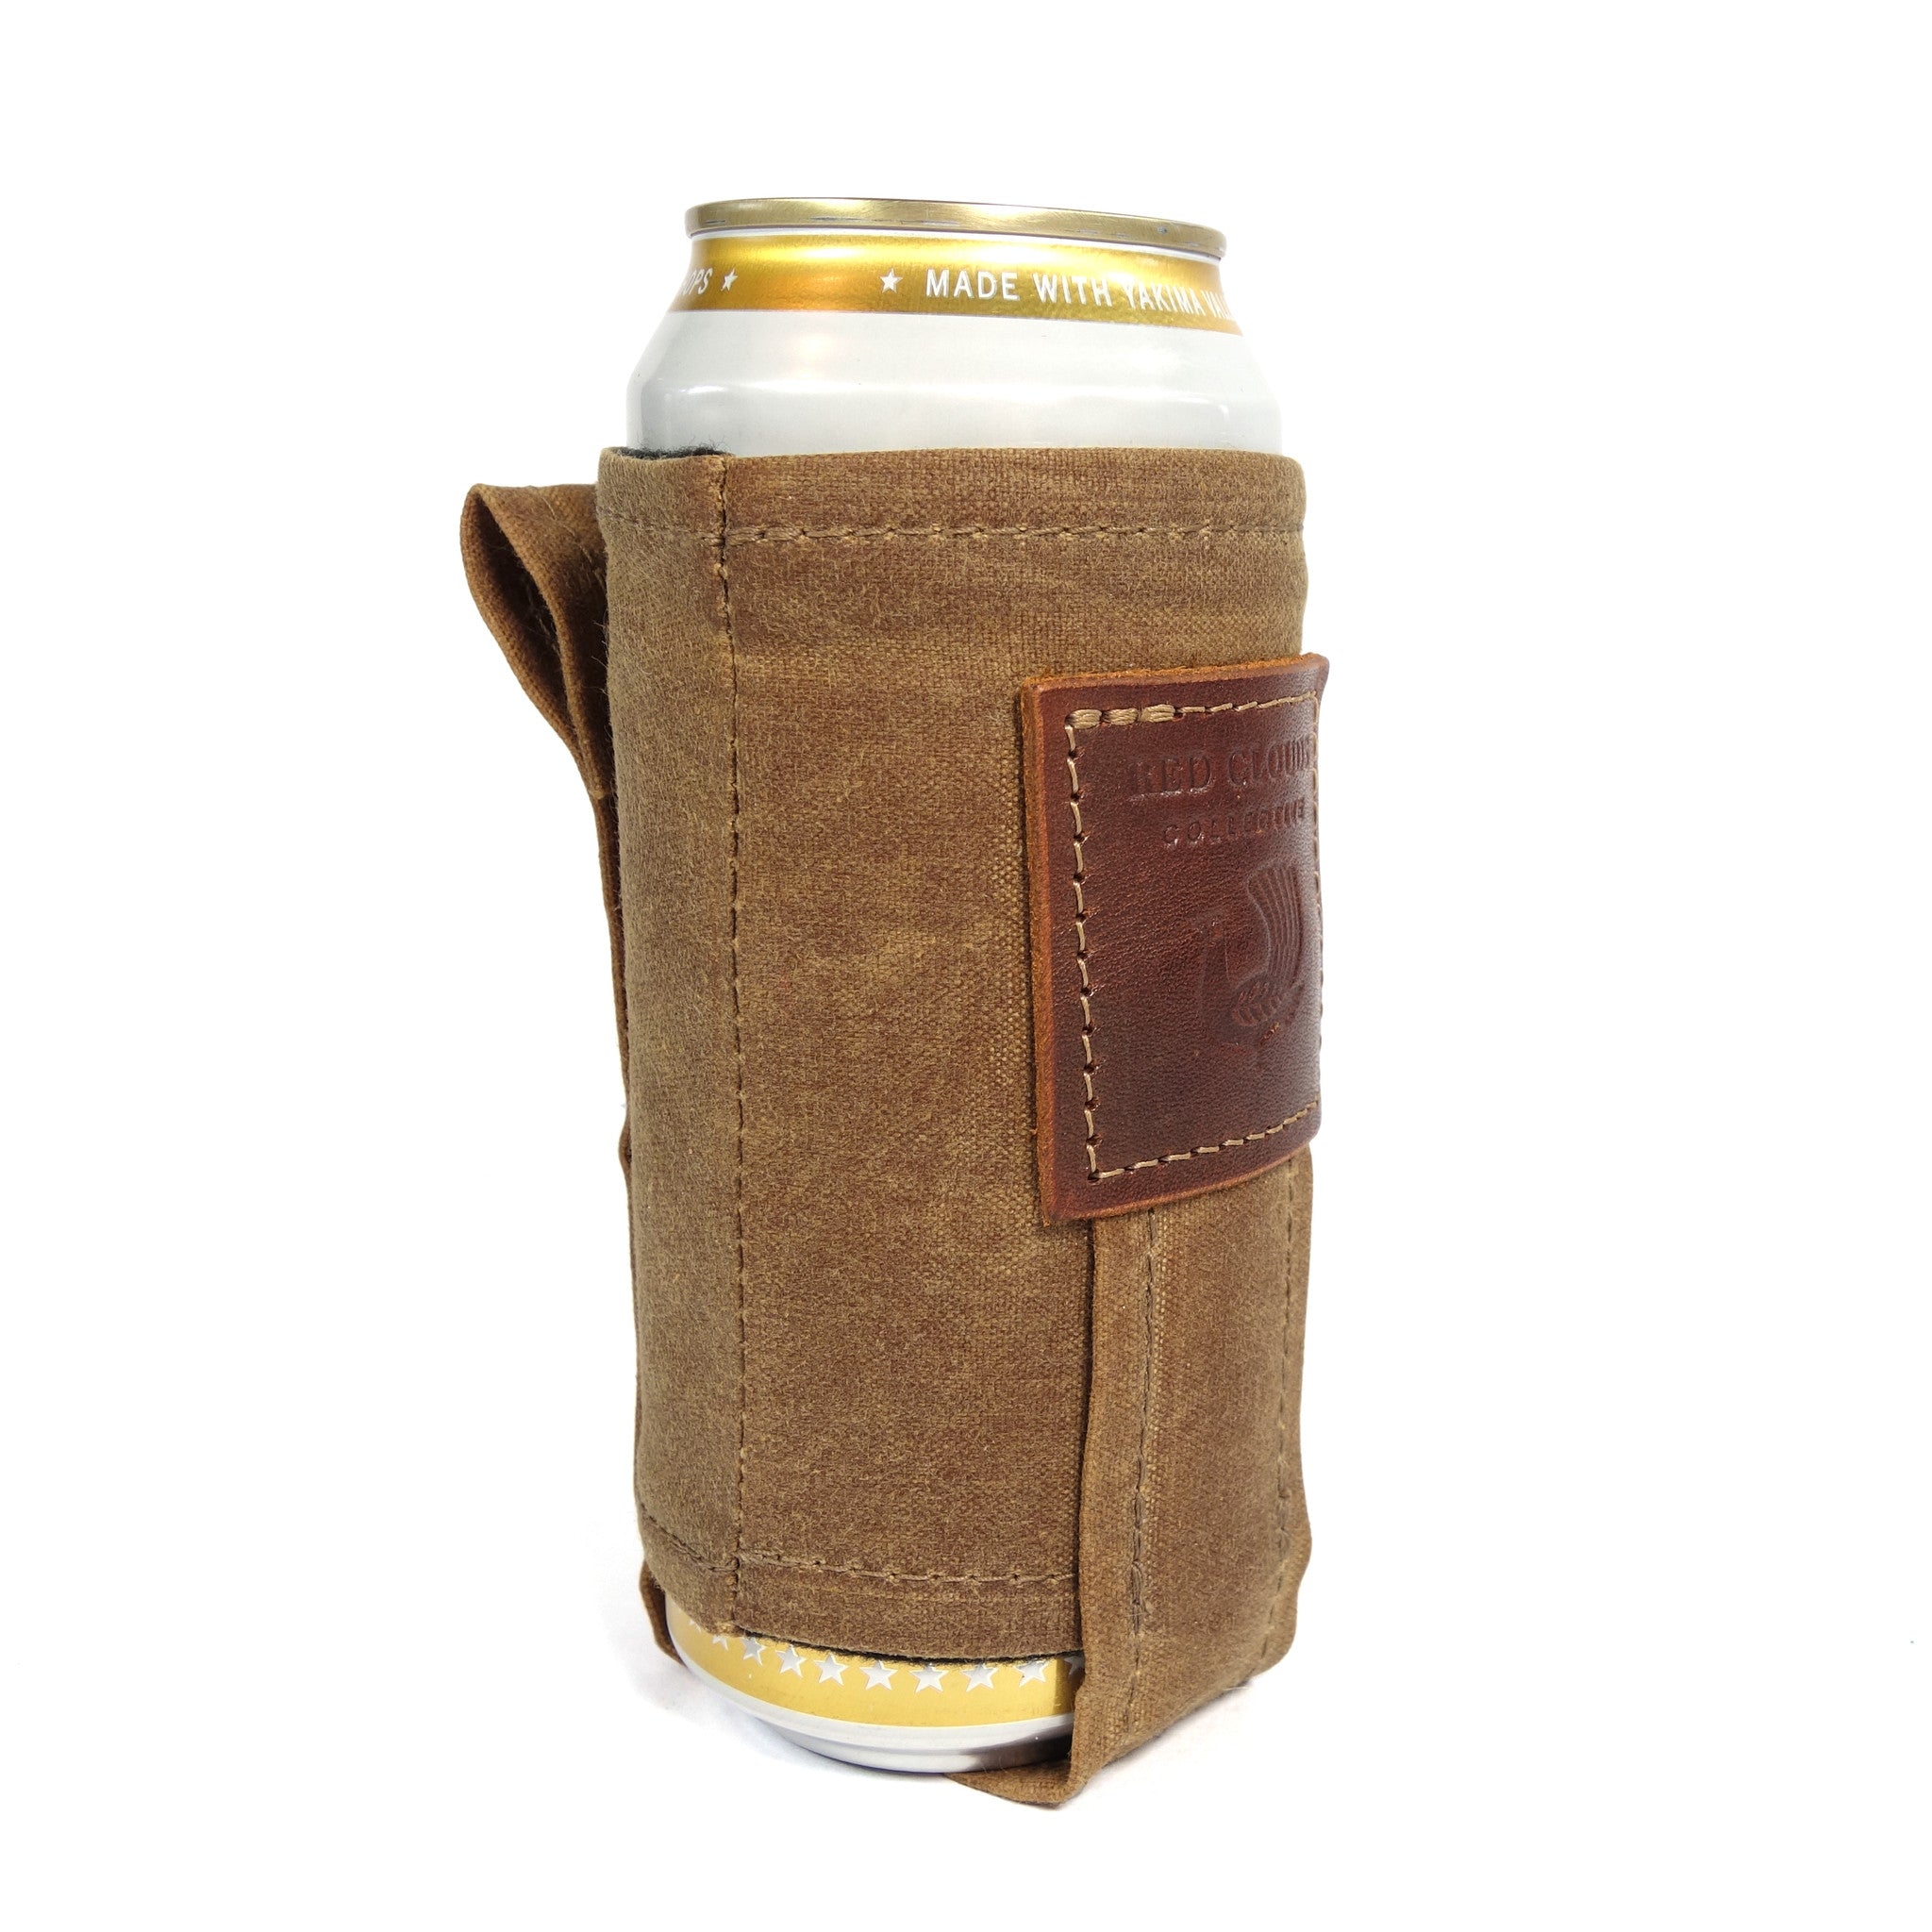 Leather Koozie - Natural - Red Clouds Collective - Made in the USA